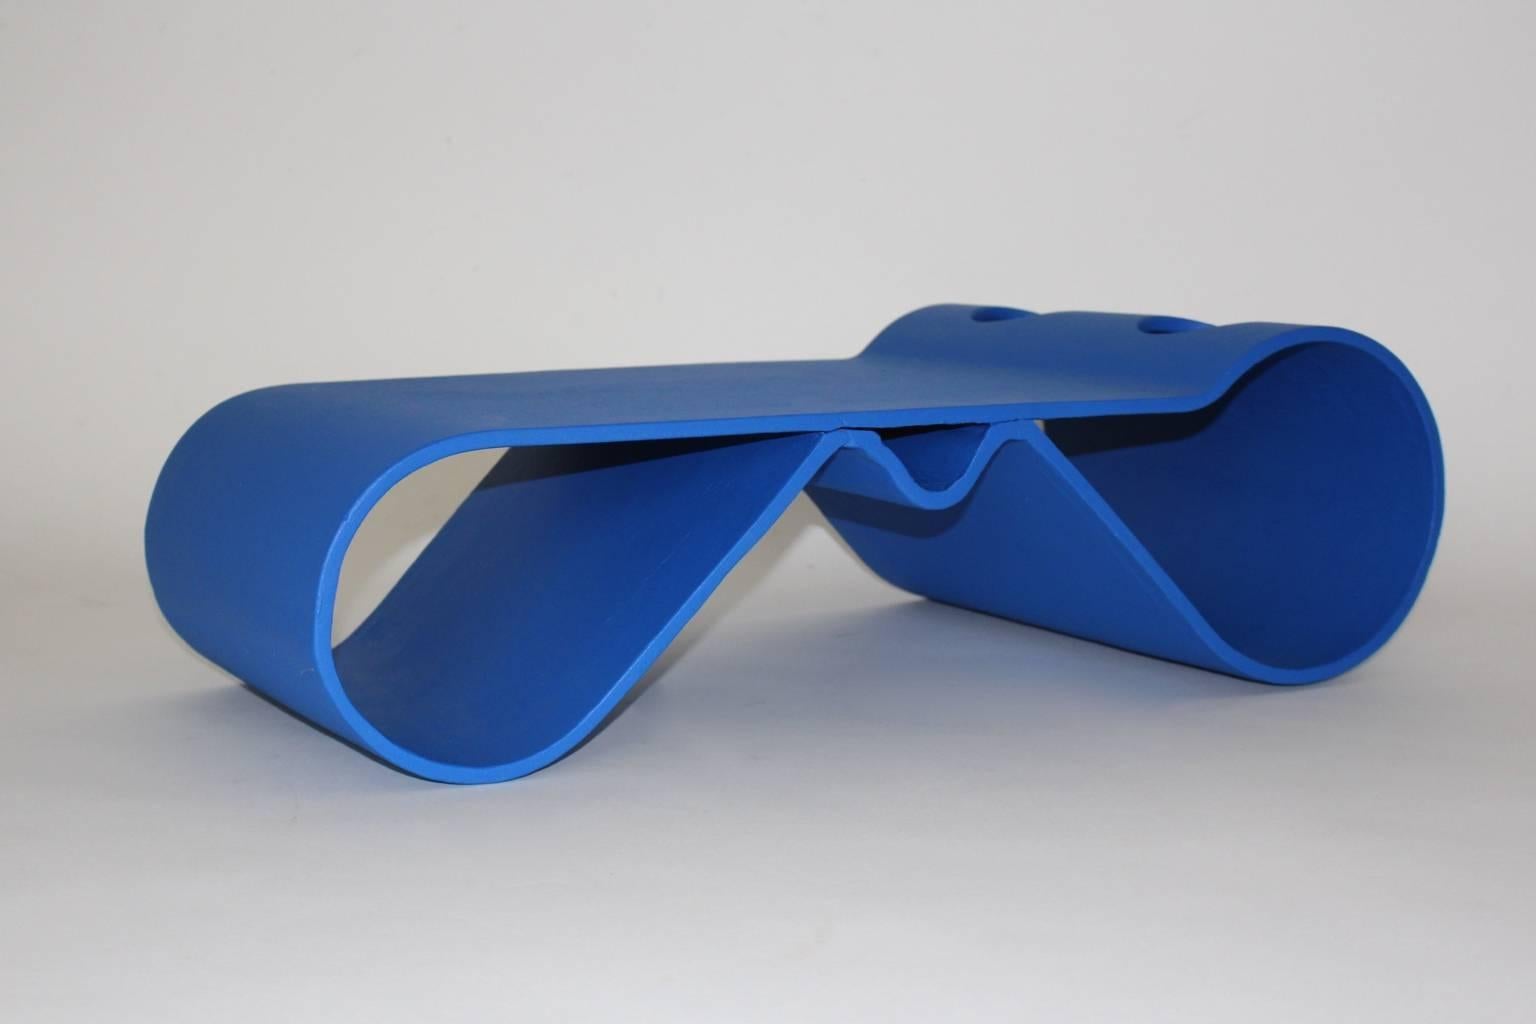 Blue modern vintage Loop coffee table by Willy Guhl (1915-2004).
This coffee table is very suitable for indoor and outdoor as a futuristic beautiful coffee table or sofa table.
The futuristic coffee table is made of bold blue lacquered cement.
Very